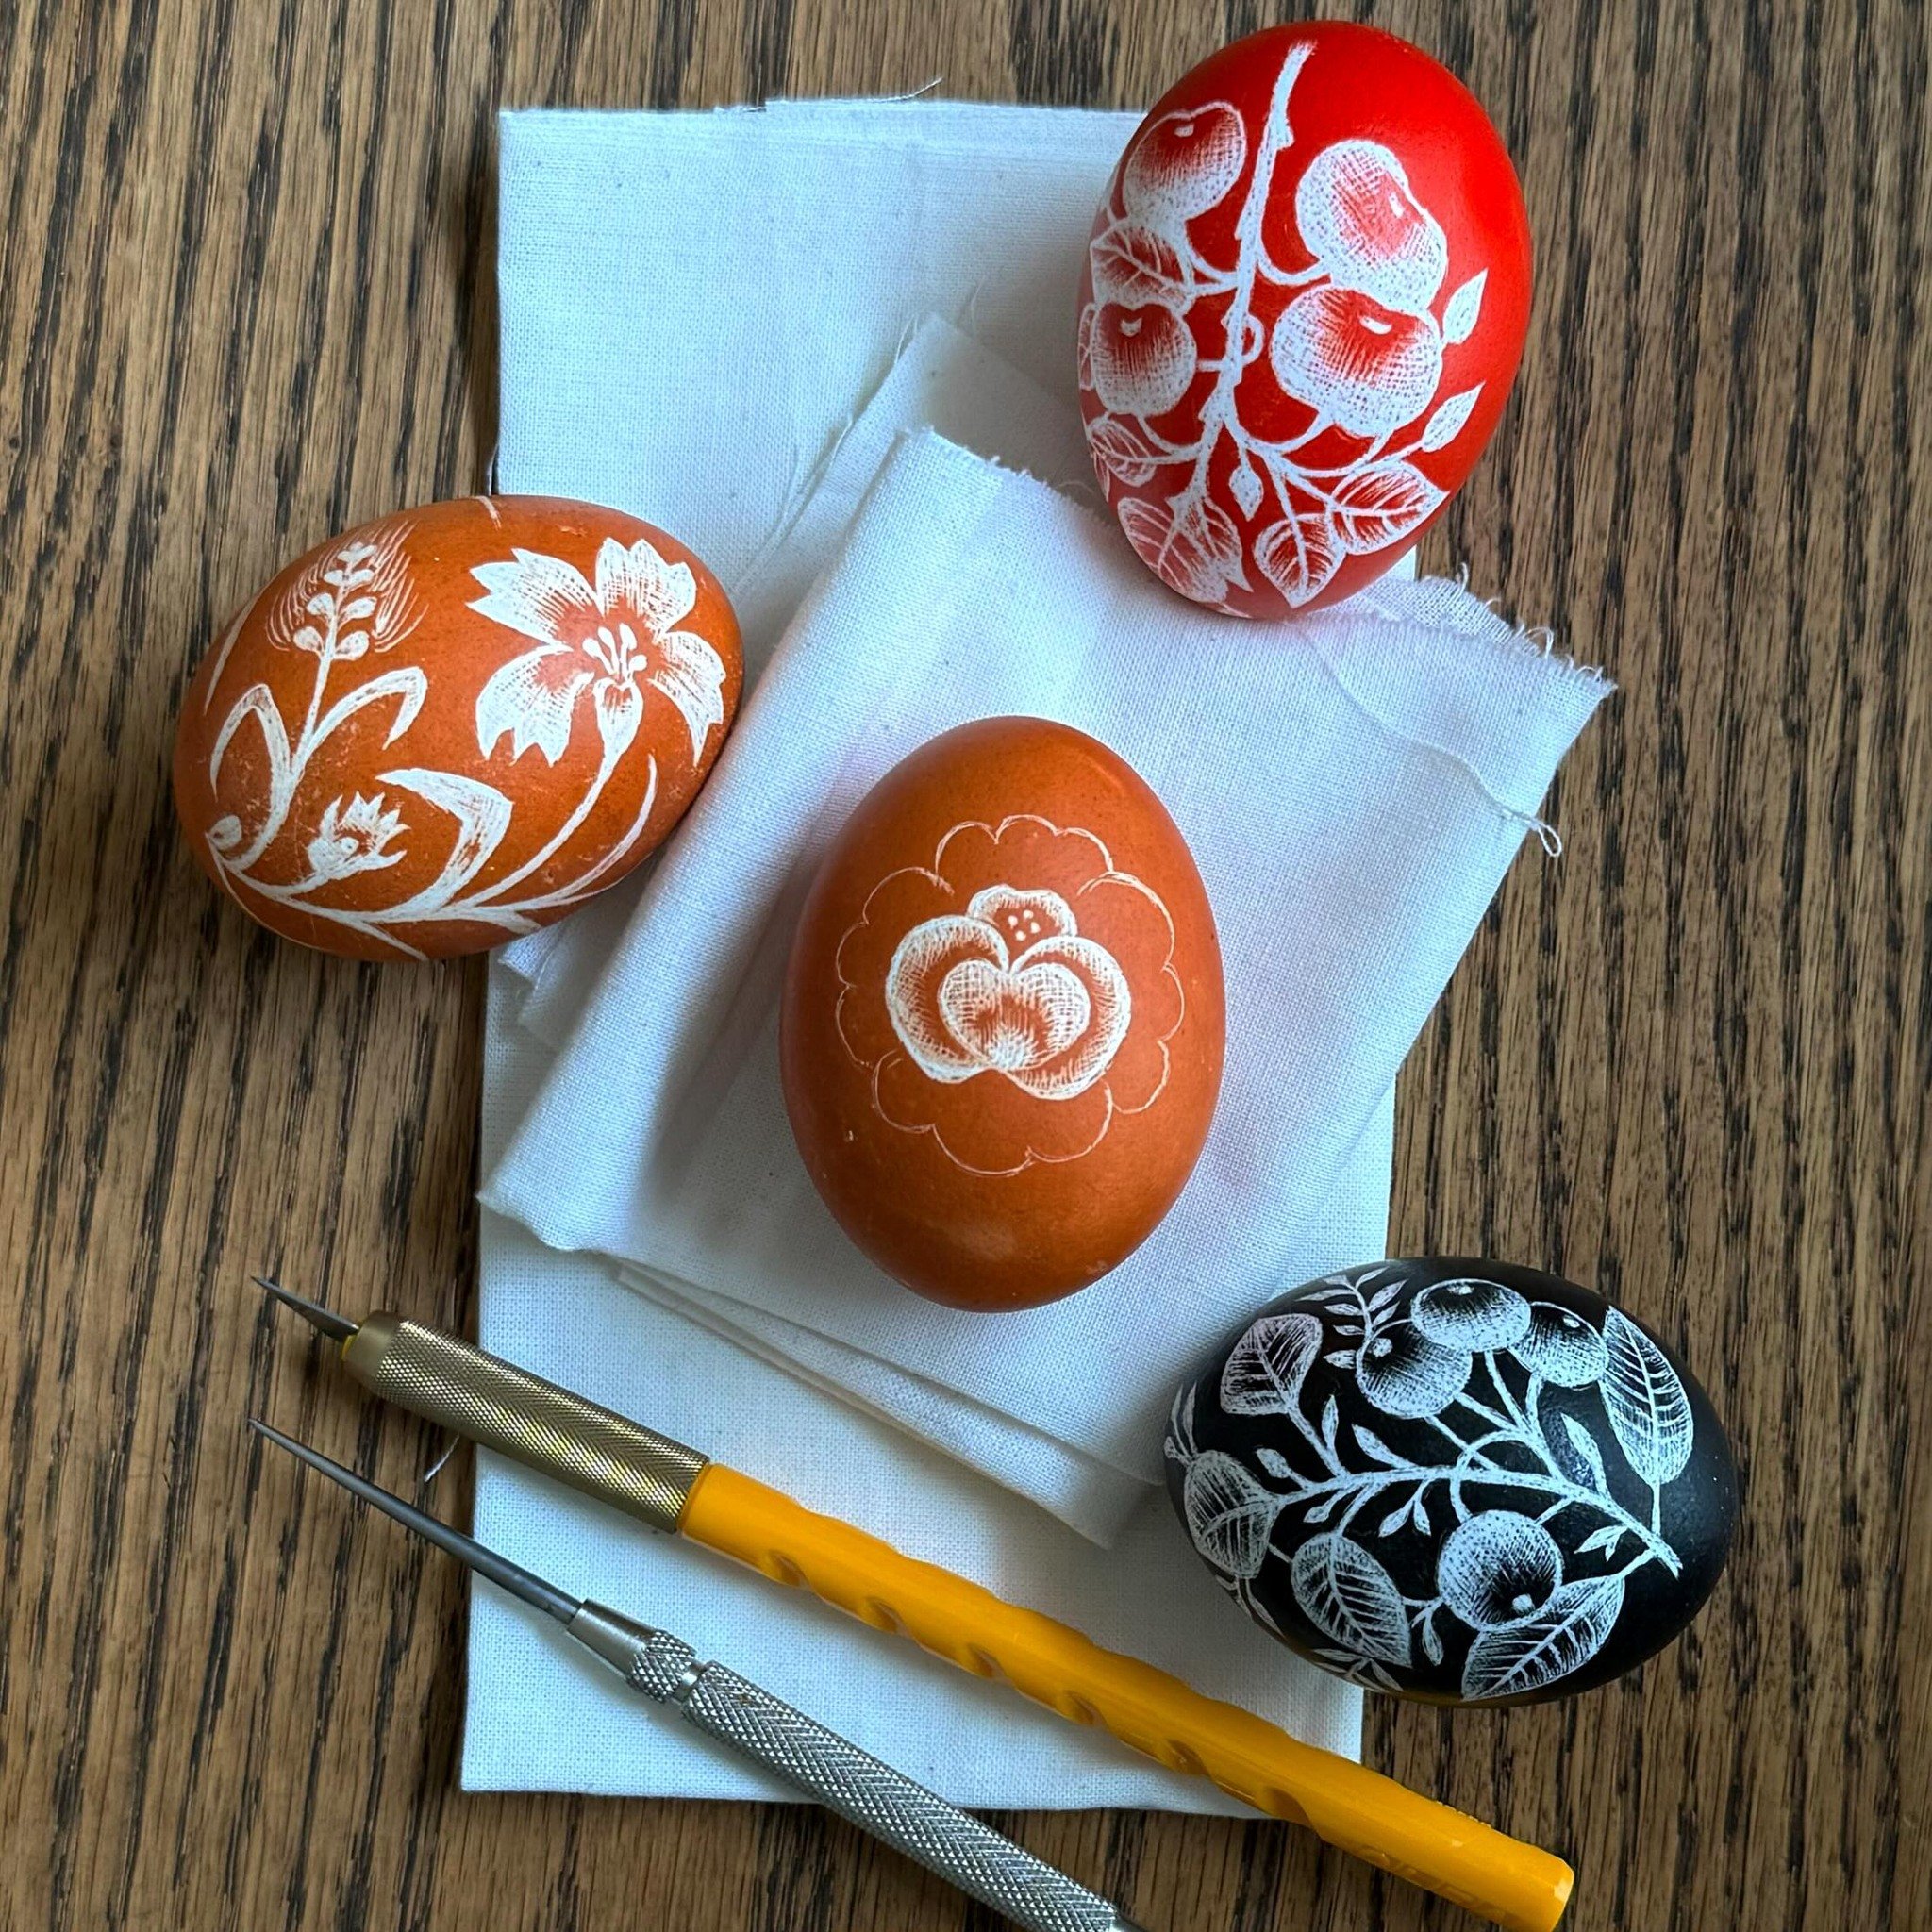 Learn how to make driapanky on Thursday, April 25 at 7 PM

Similar to Pysanky, Driapanky involves dyeing eggs in a single colour, but to decorate the egg, you gently scratch away the surface to reveal the white shell beneath. This practise, known as 